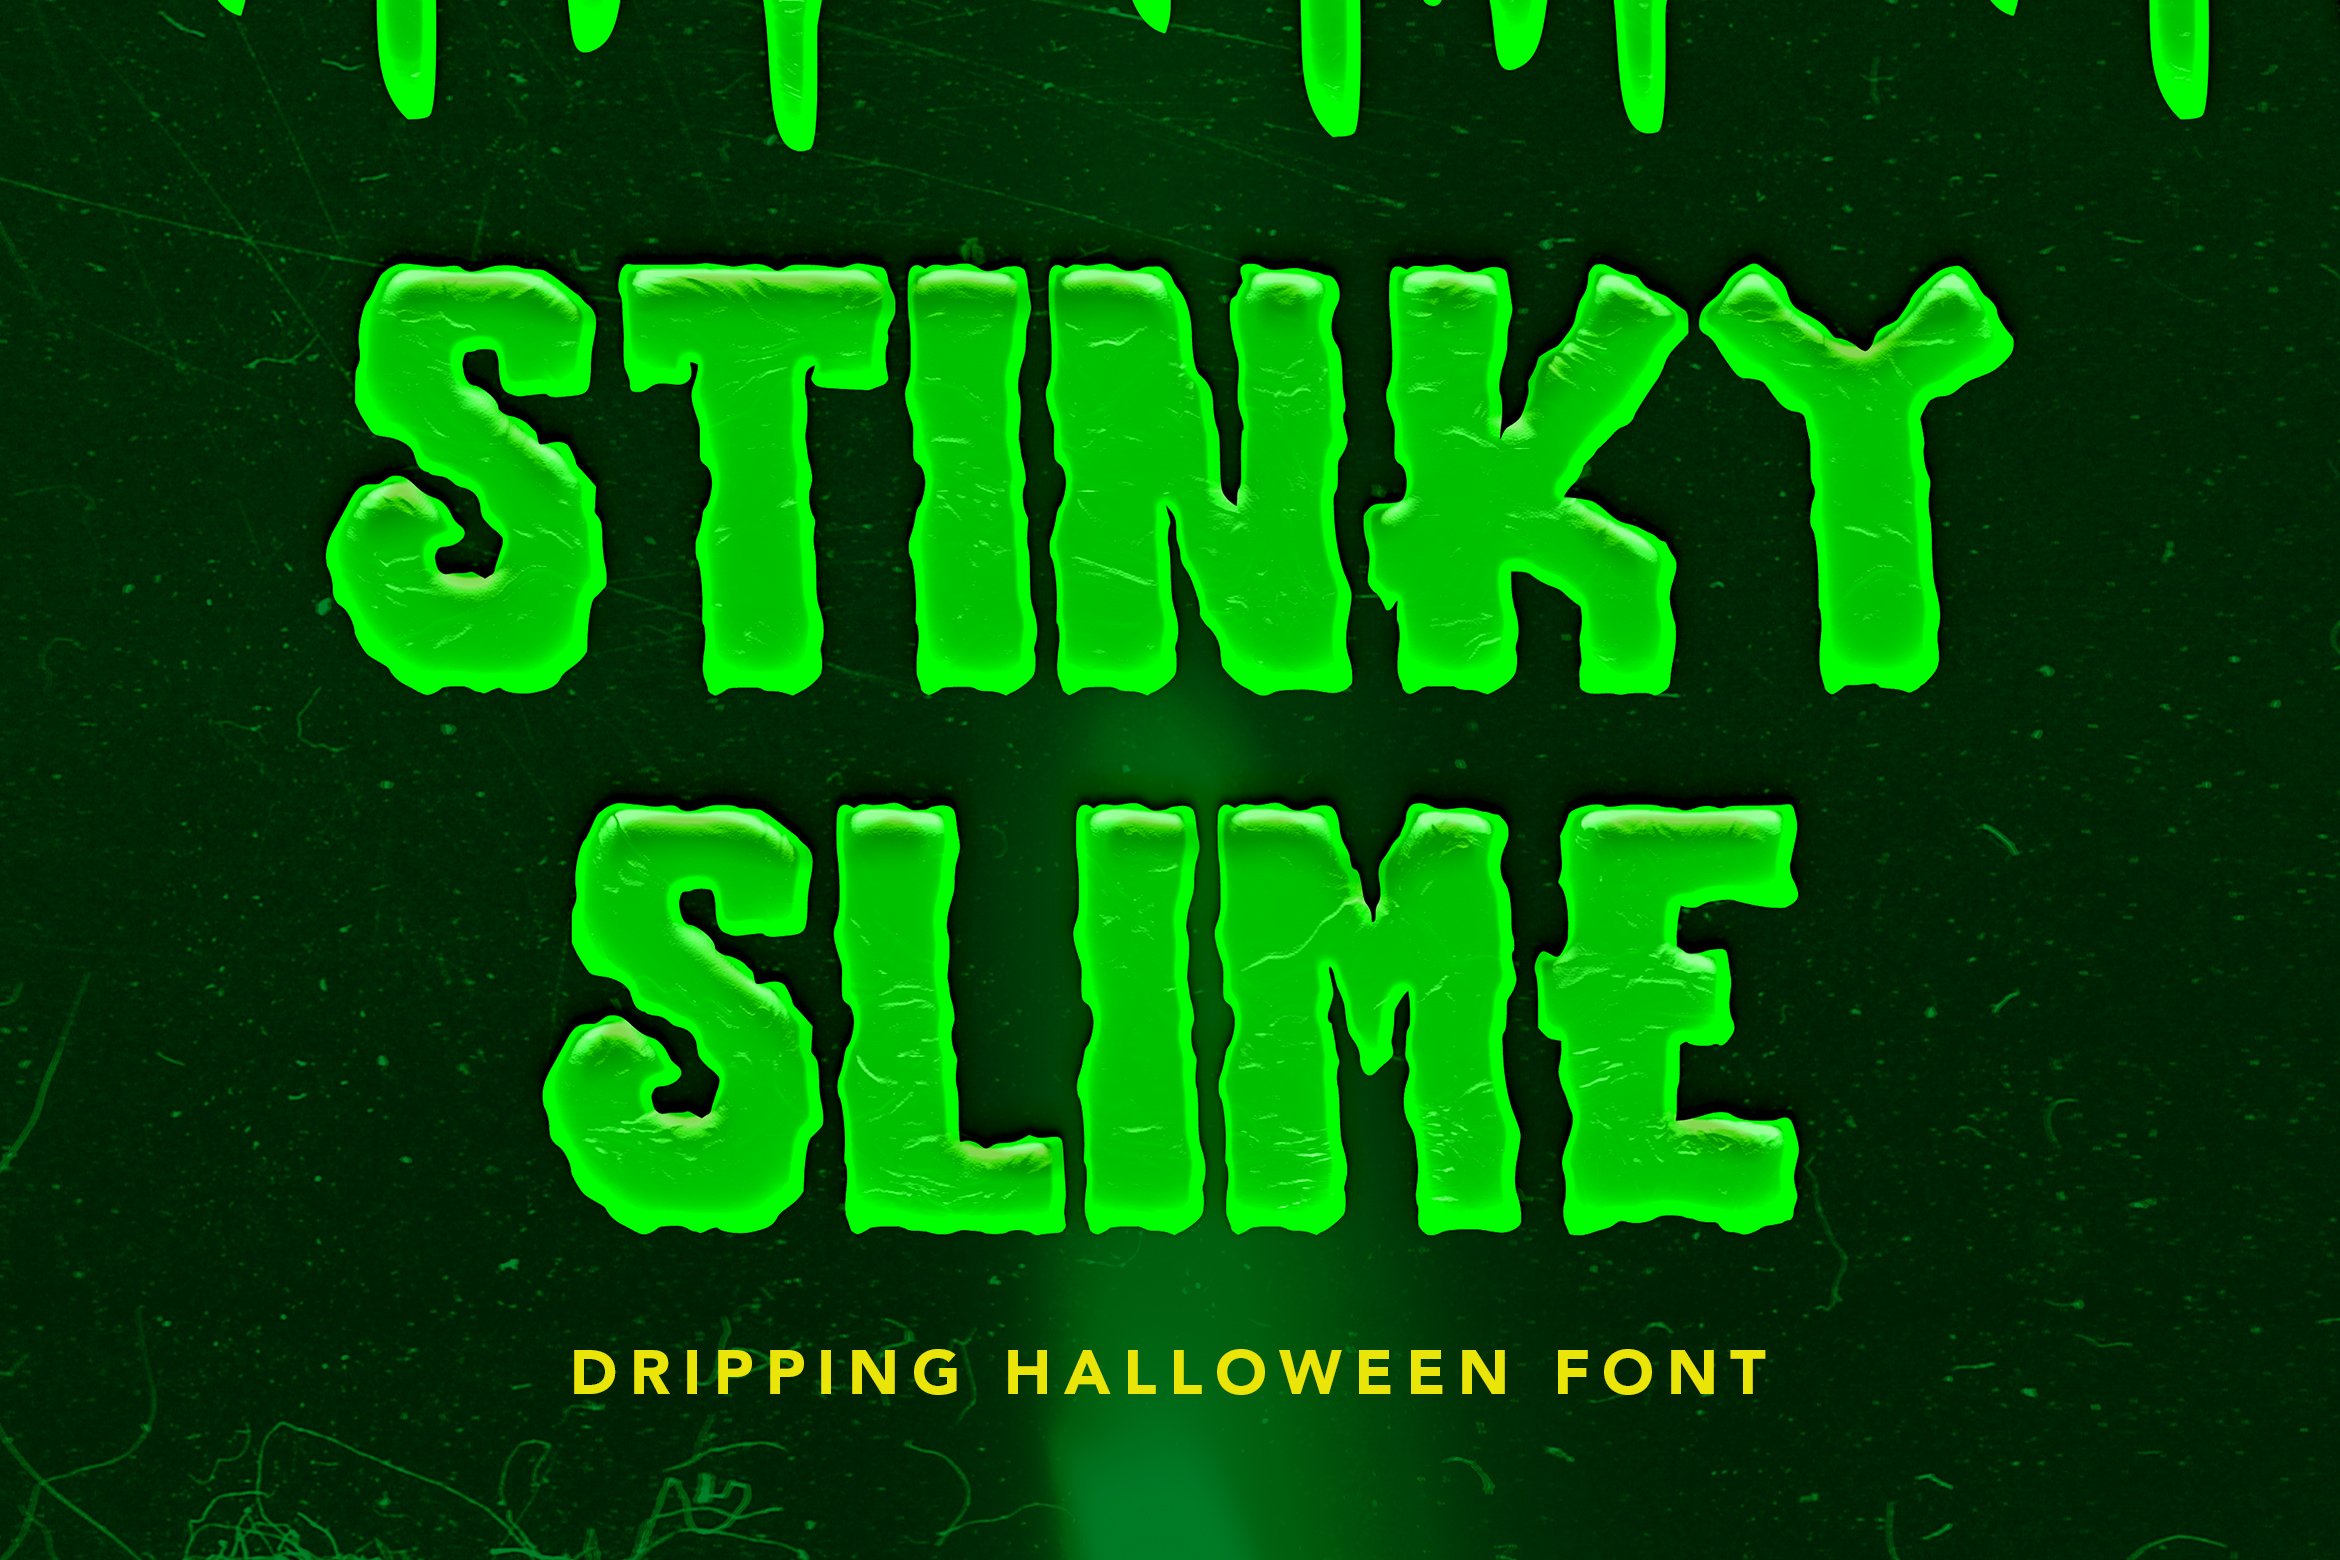 Stinky Slime - Halloween Font cover image.